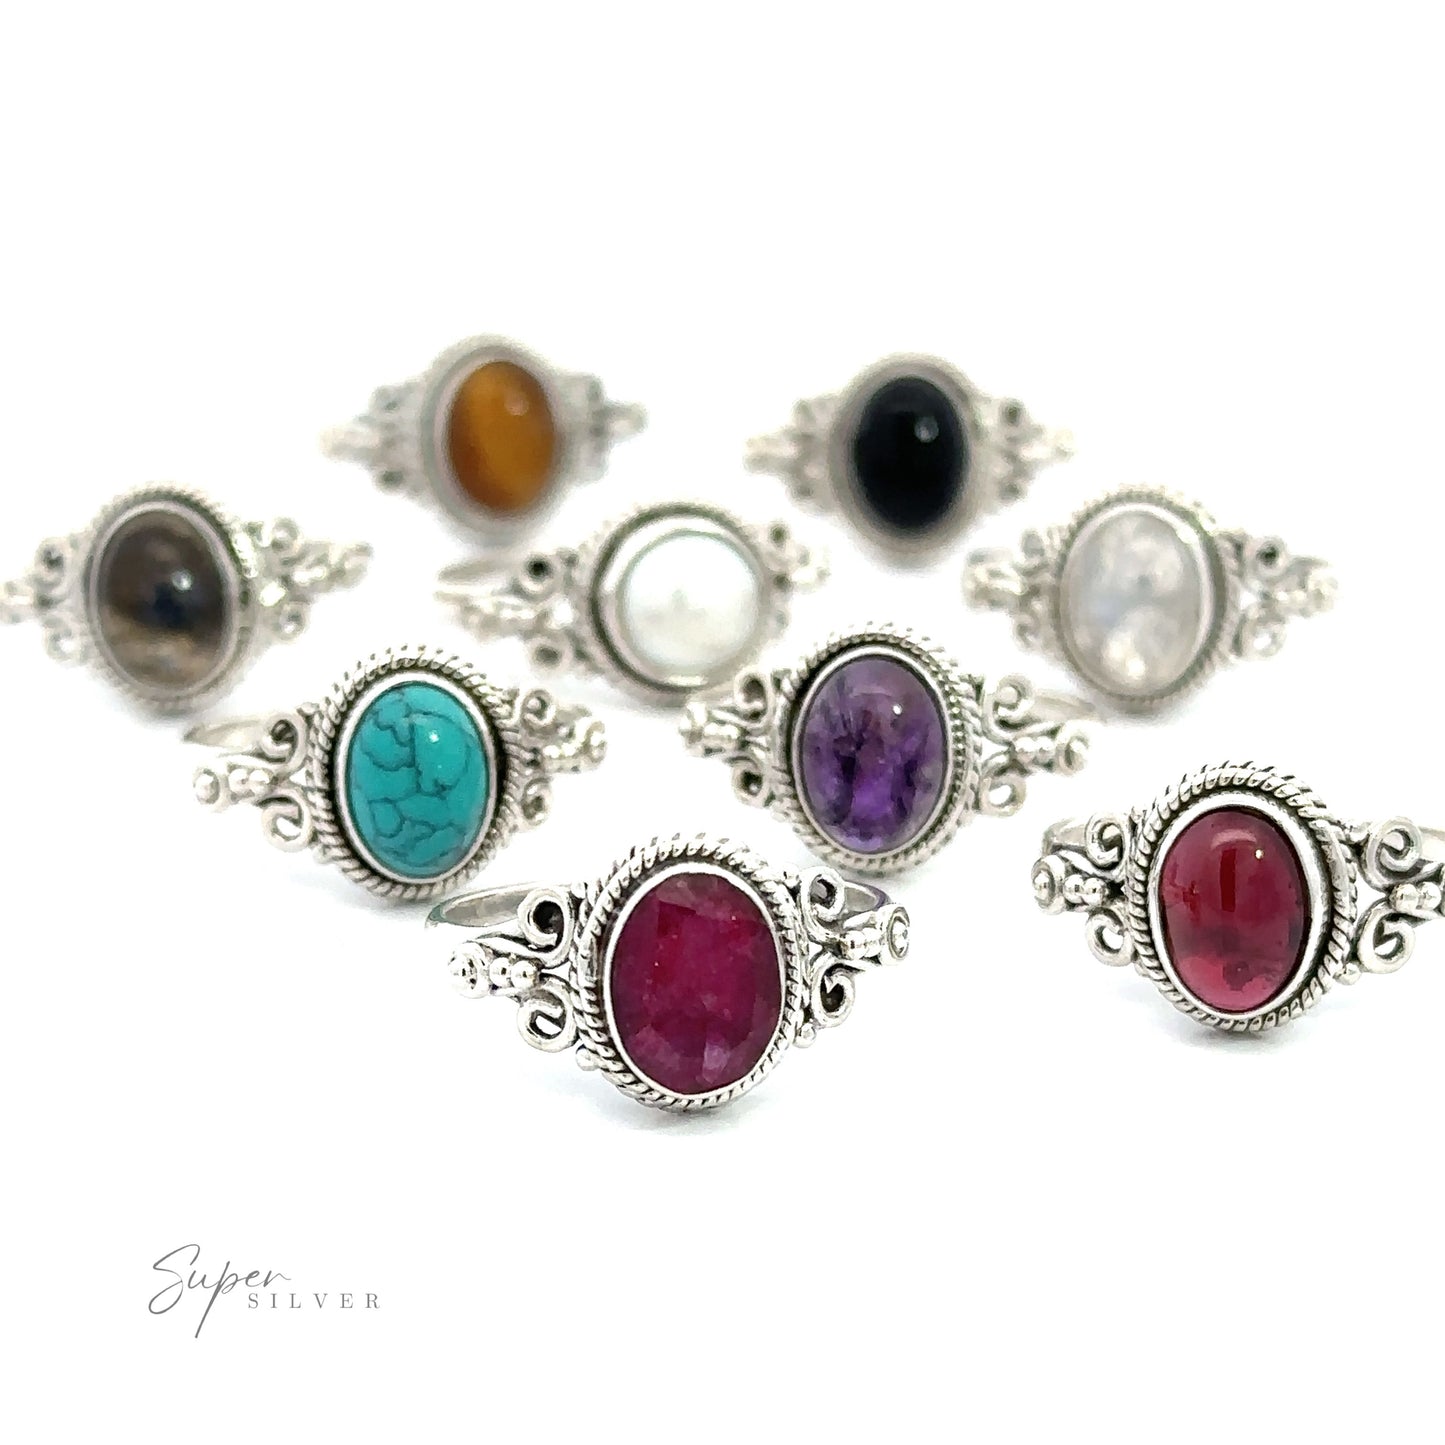 A collection of Natural Oval Gemstone Rings with Intricate Rope and Long Spiral Border displayed against a white background.